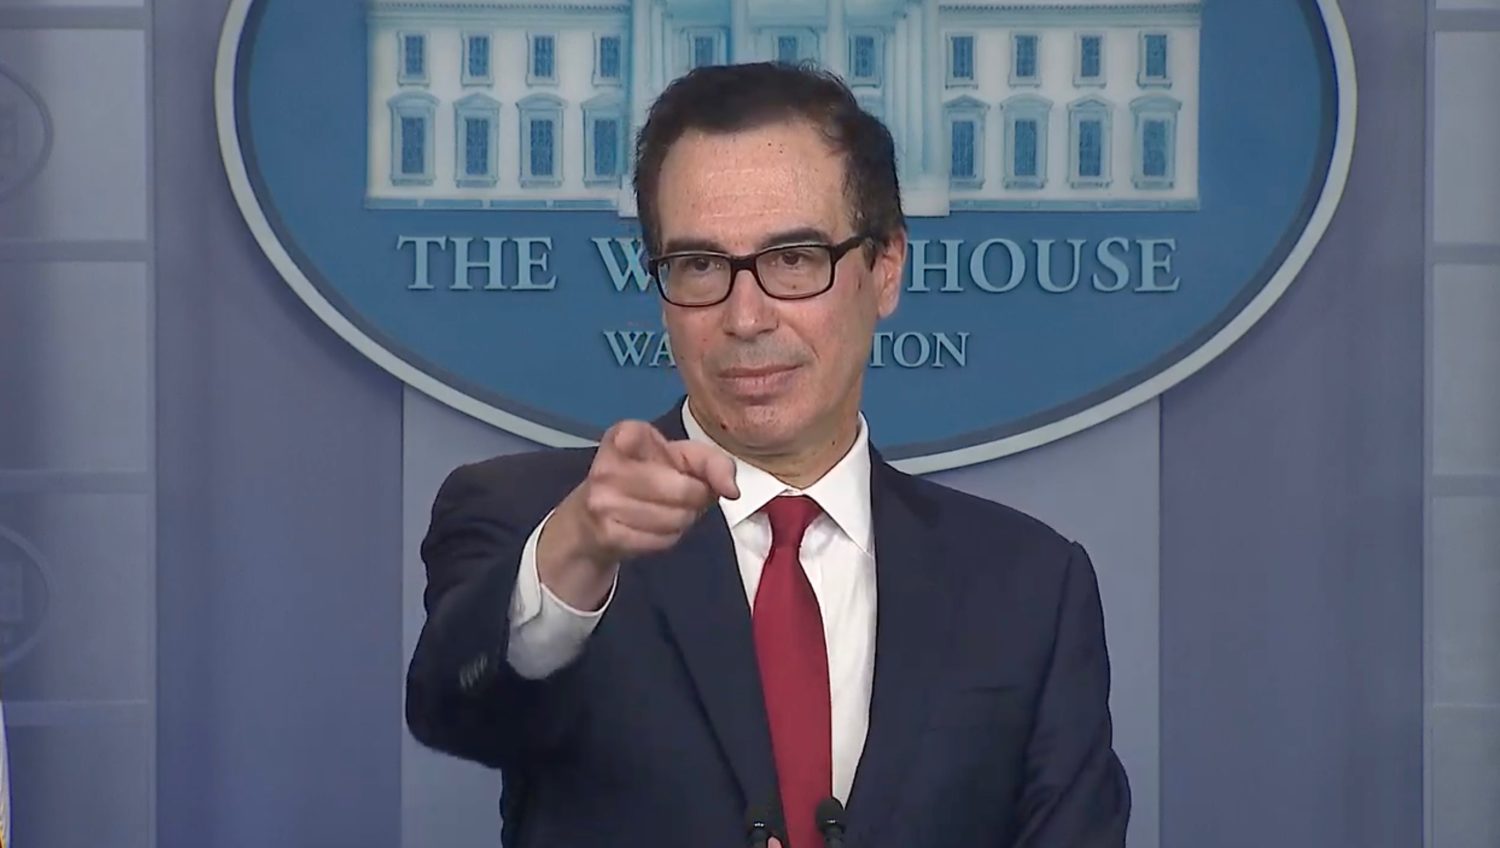 Mnuchin ‘Fine’ With Libra Launch, But Crypto Project Must ‘Fully’ Comply With AML Rules